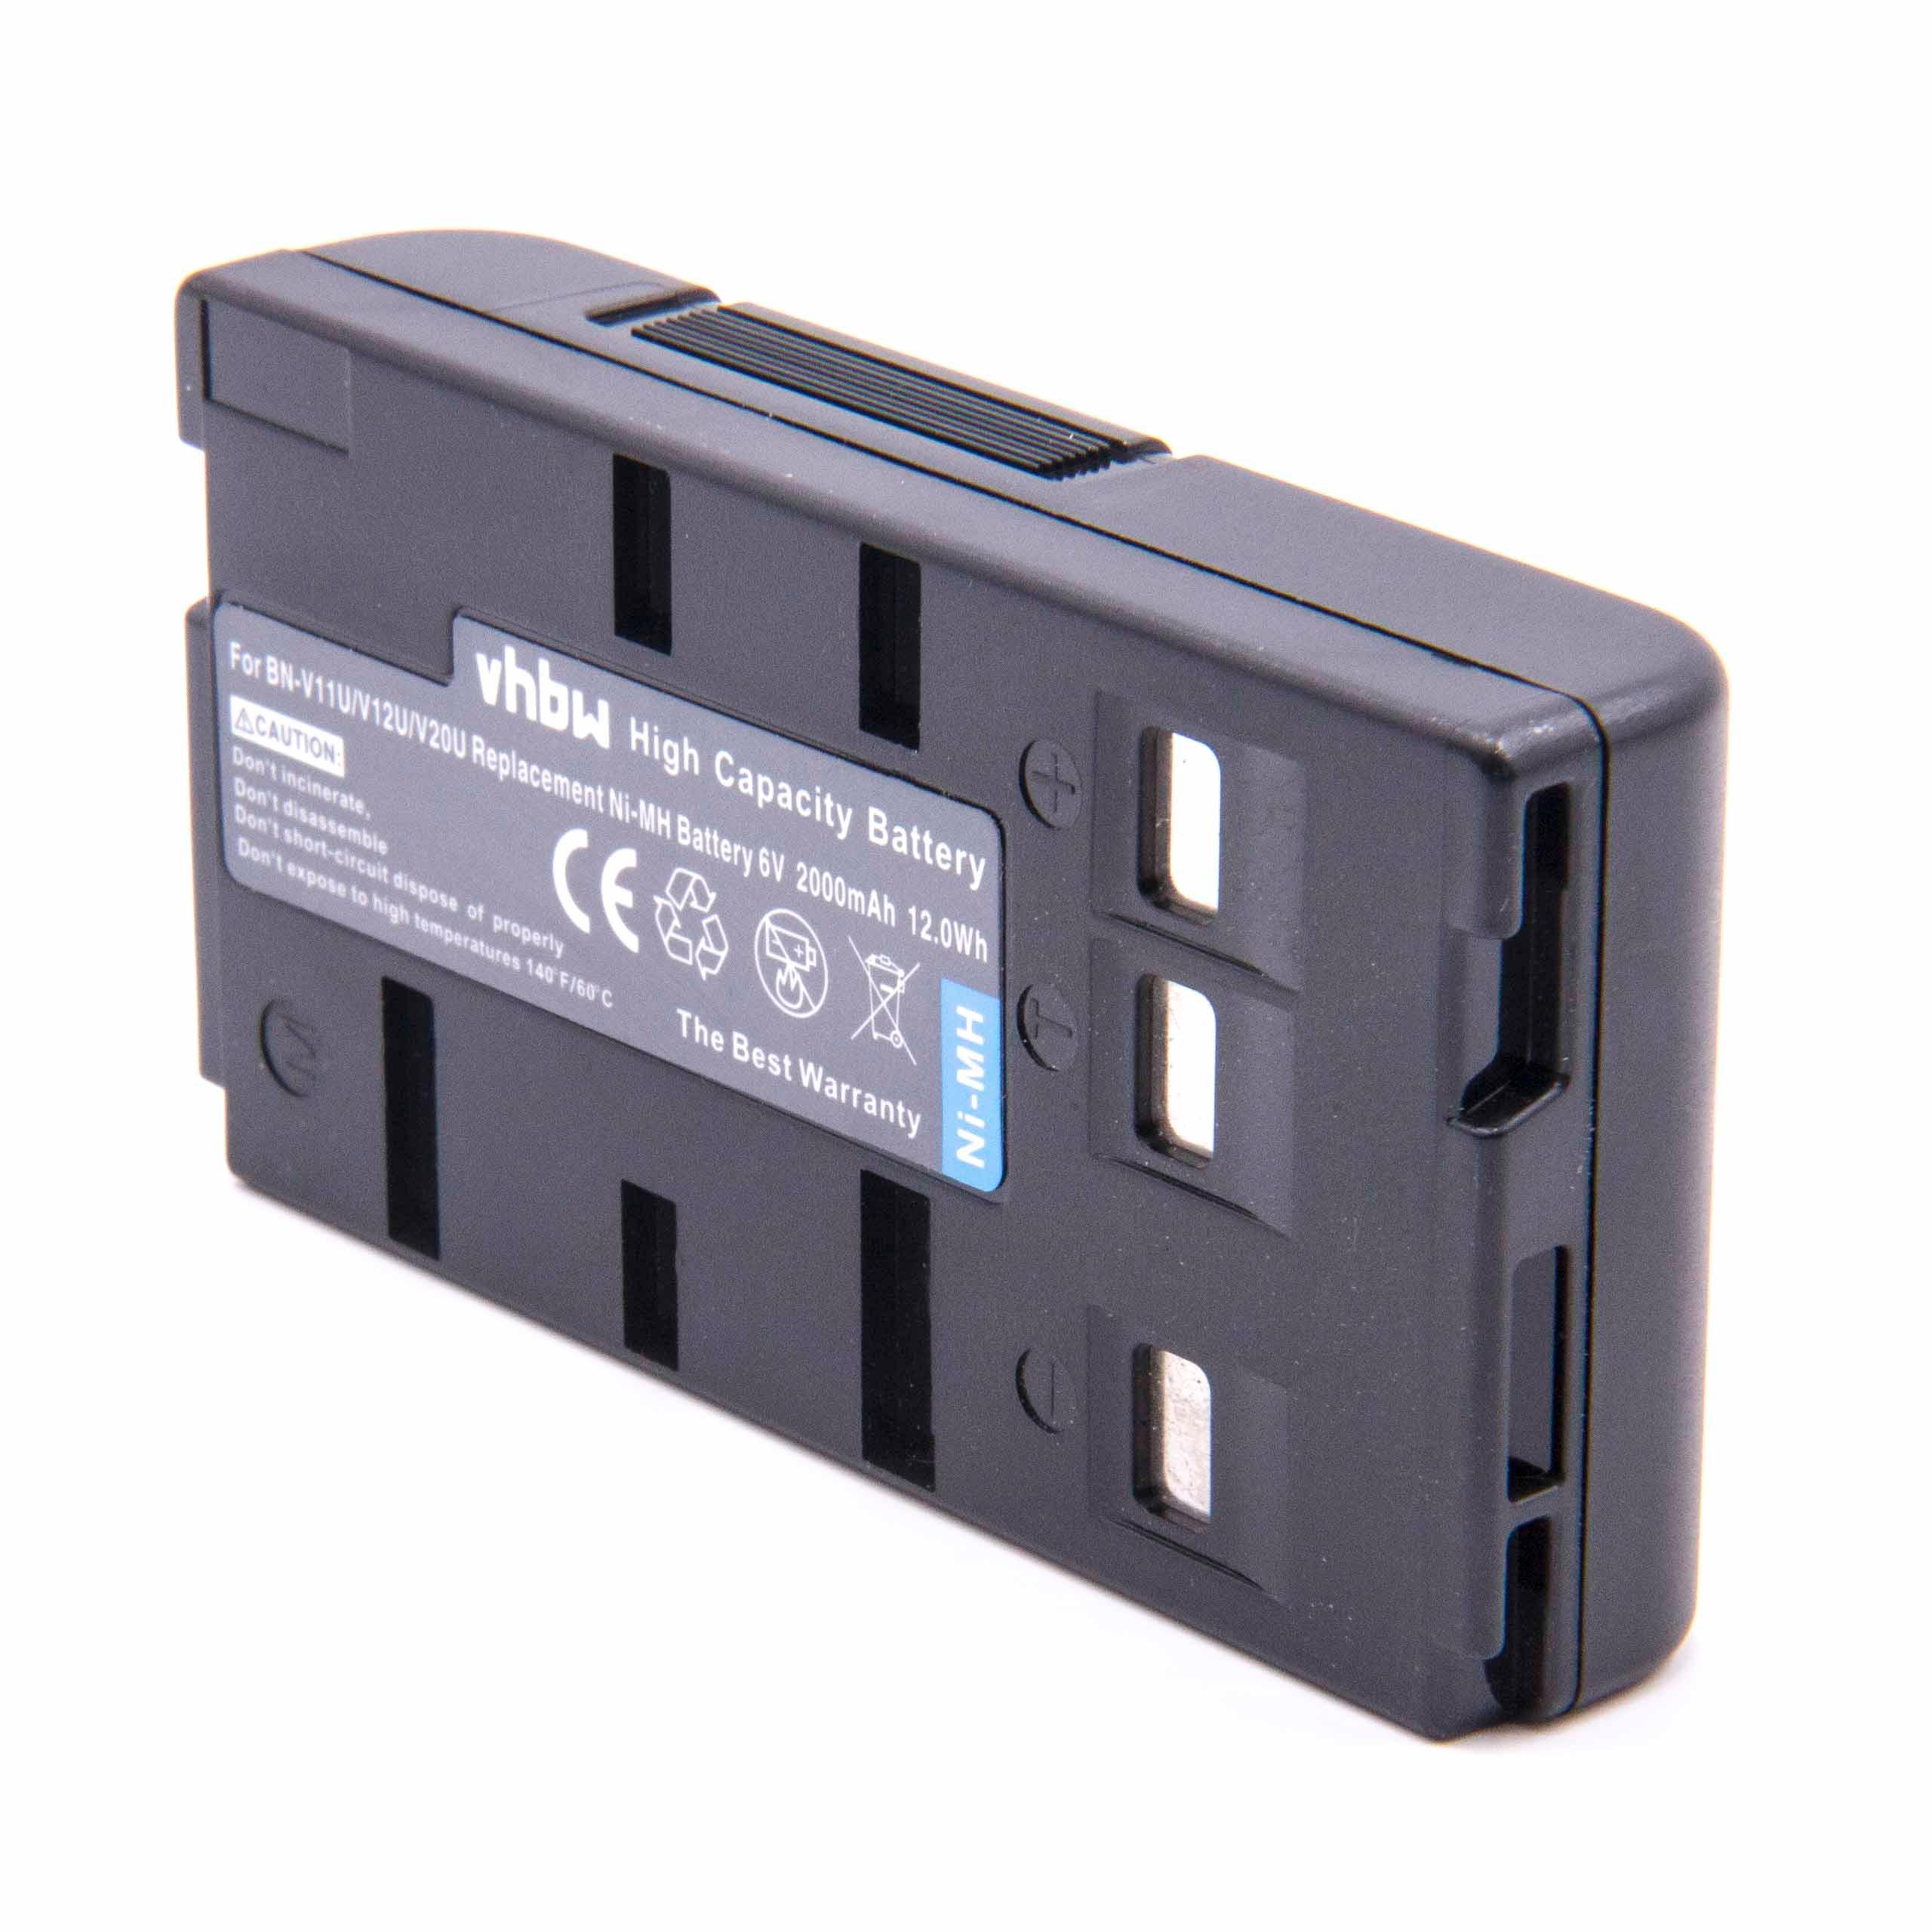 Videocamera Battery Replacement for JVC BN-V22U, BN-V20, BN-V24U, BN-V22, BN-V20US, BN-V20U - 2000mAh 6V NiMH